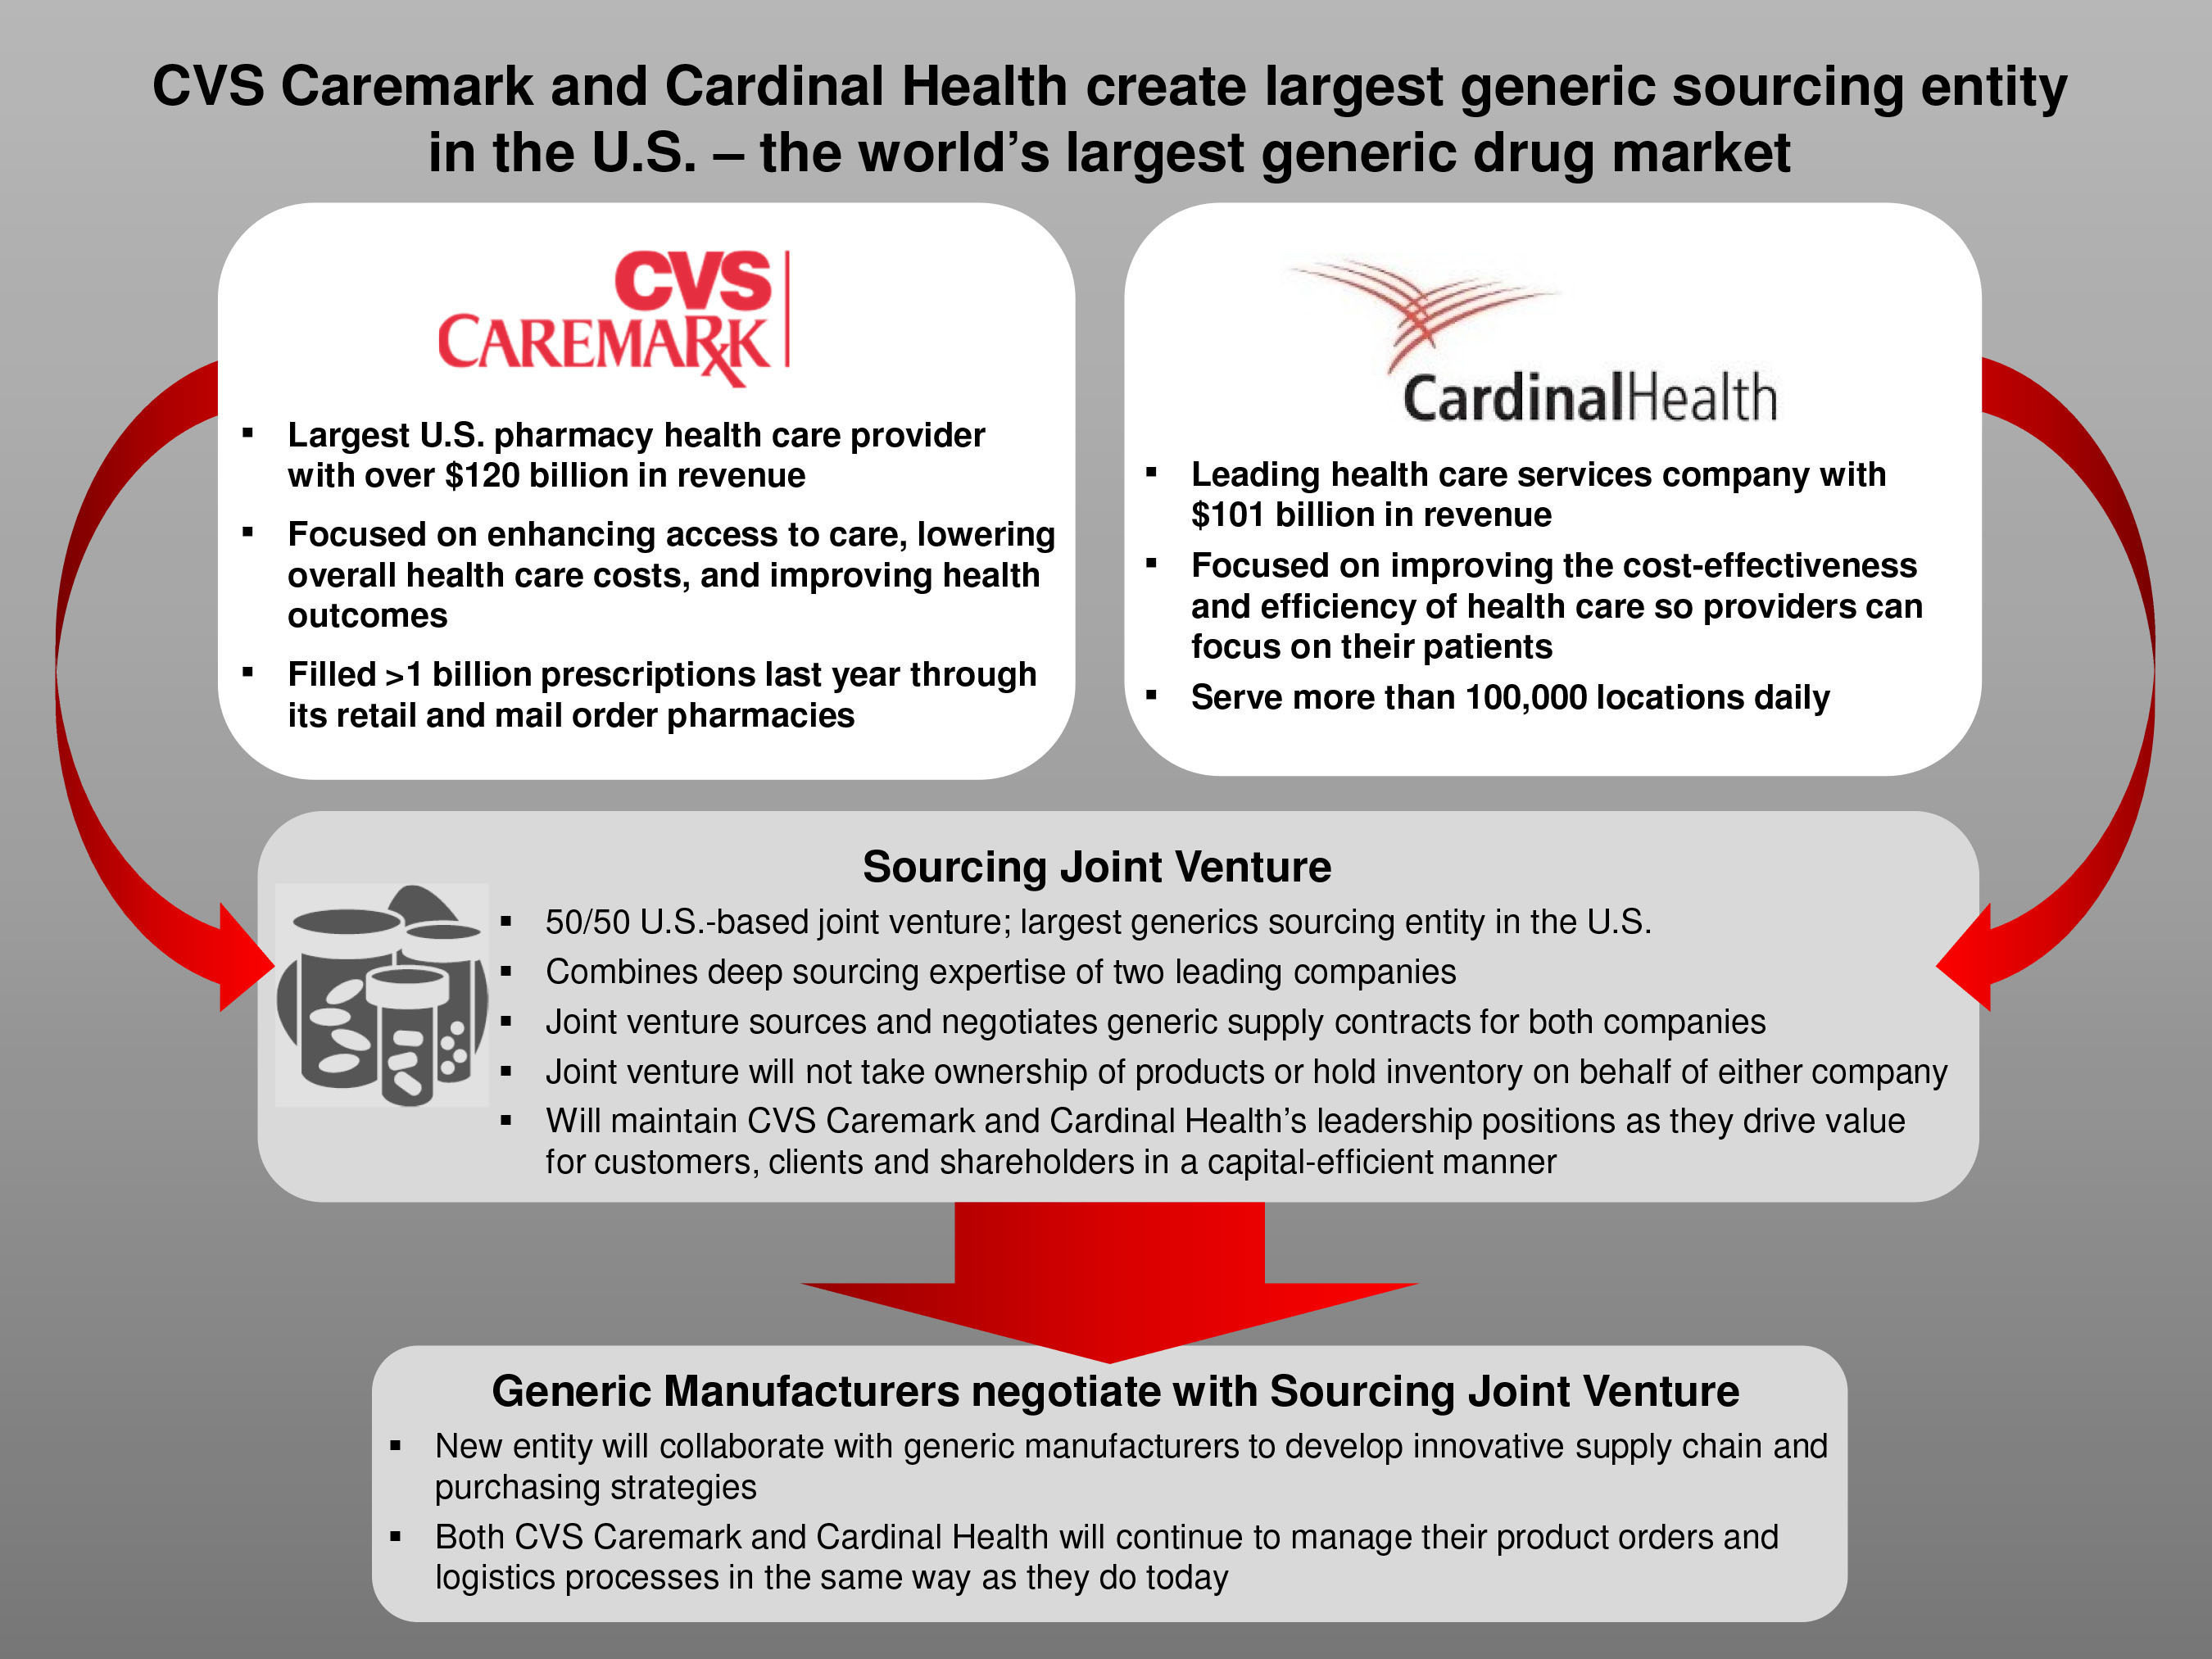 CVS Caremark And Cardinal Health Announce Creation Of Largest Generic Sourcing Entity In U.S. (PRNewsFoto/Cardinal Health) (PRNewsFoto/CARDINAL HEALTH)